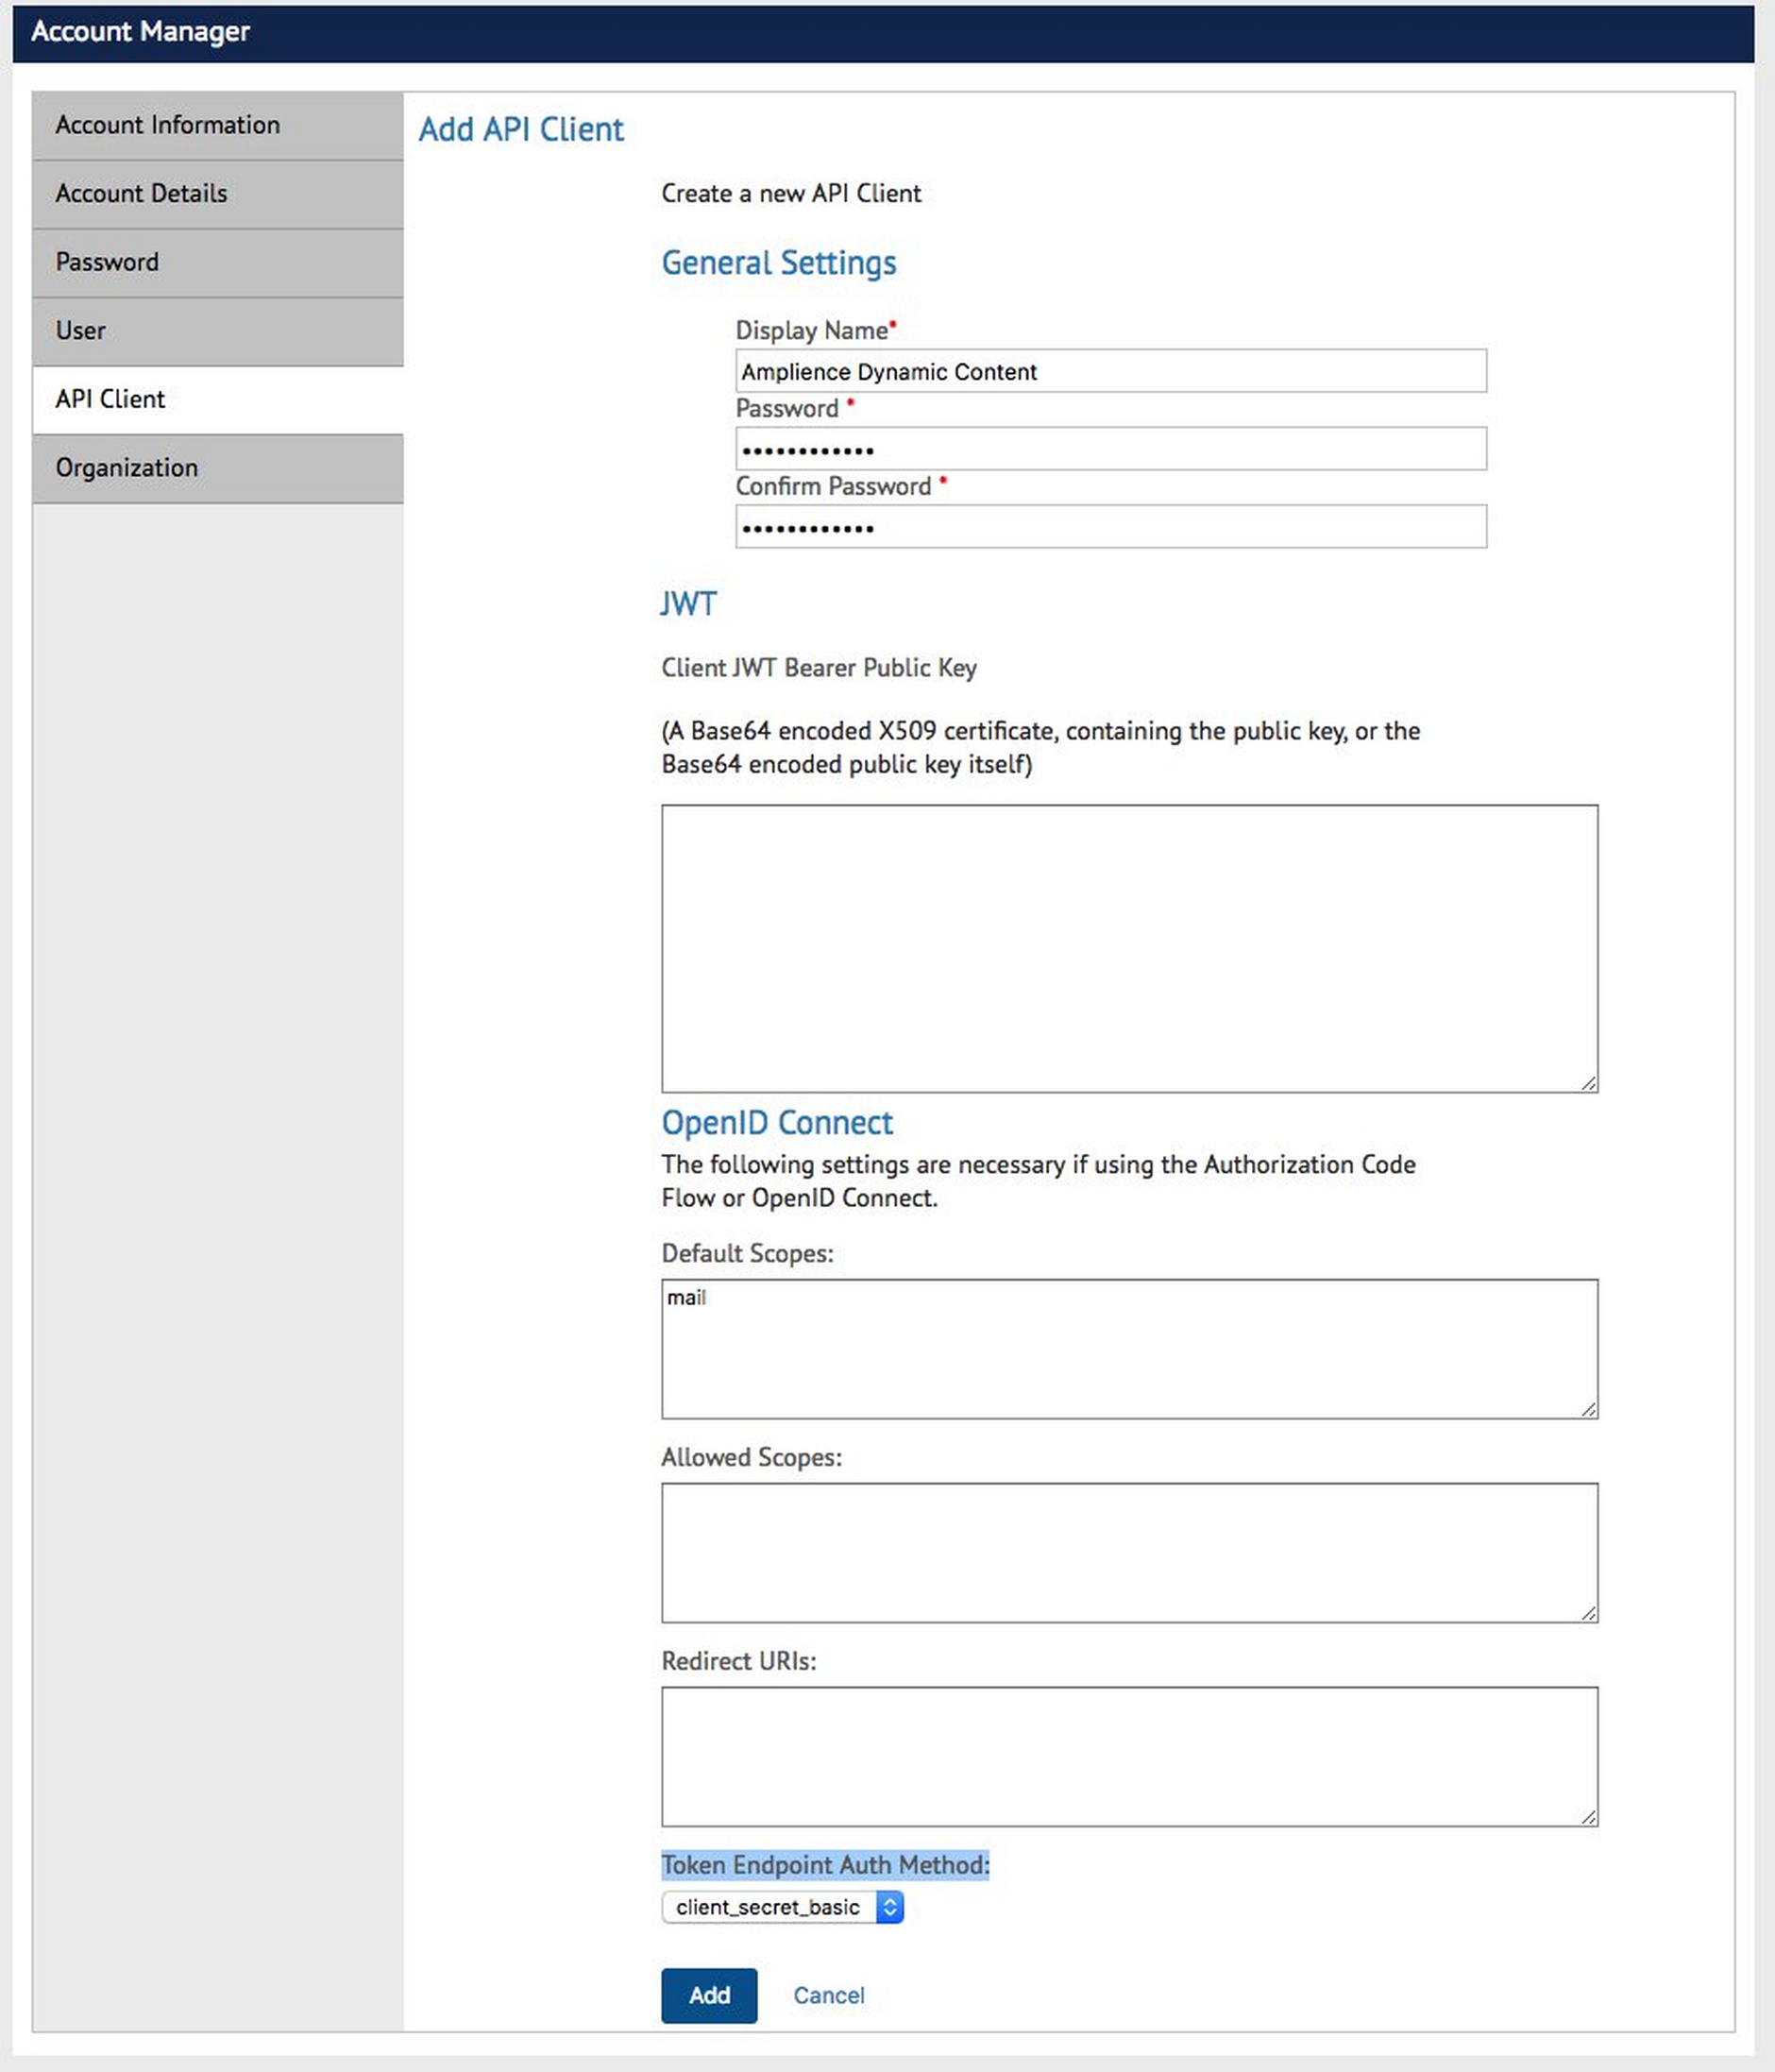 The Add API Client screen in SFCC Account Manager